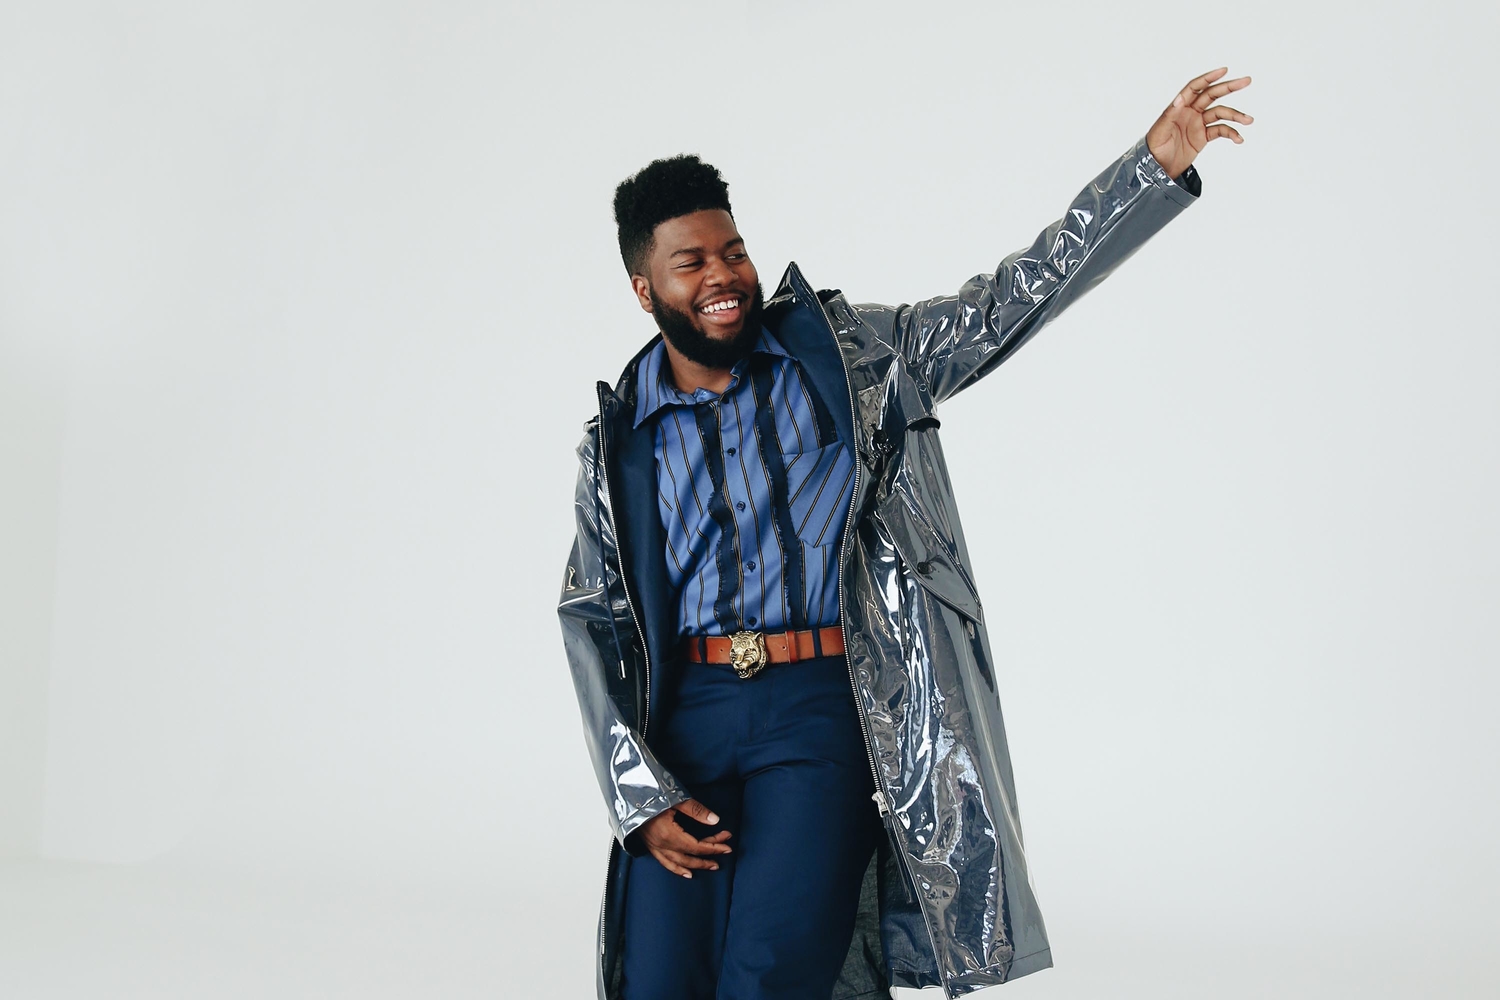 Khalid to play second night at the O2